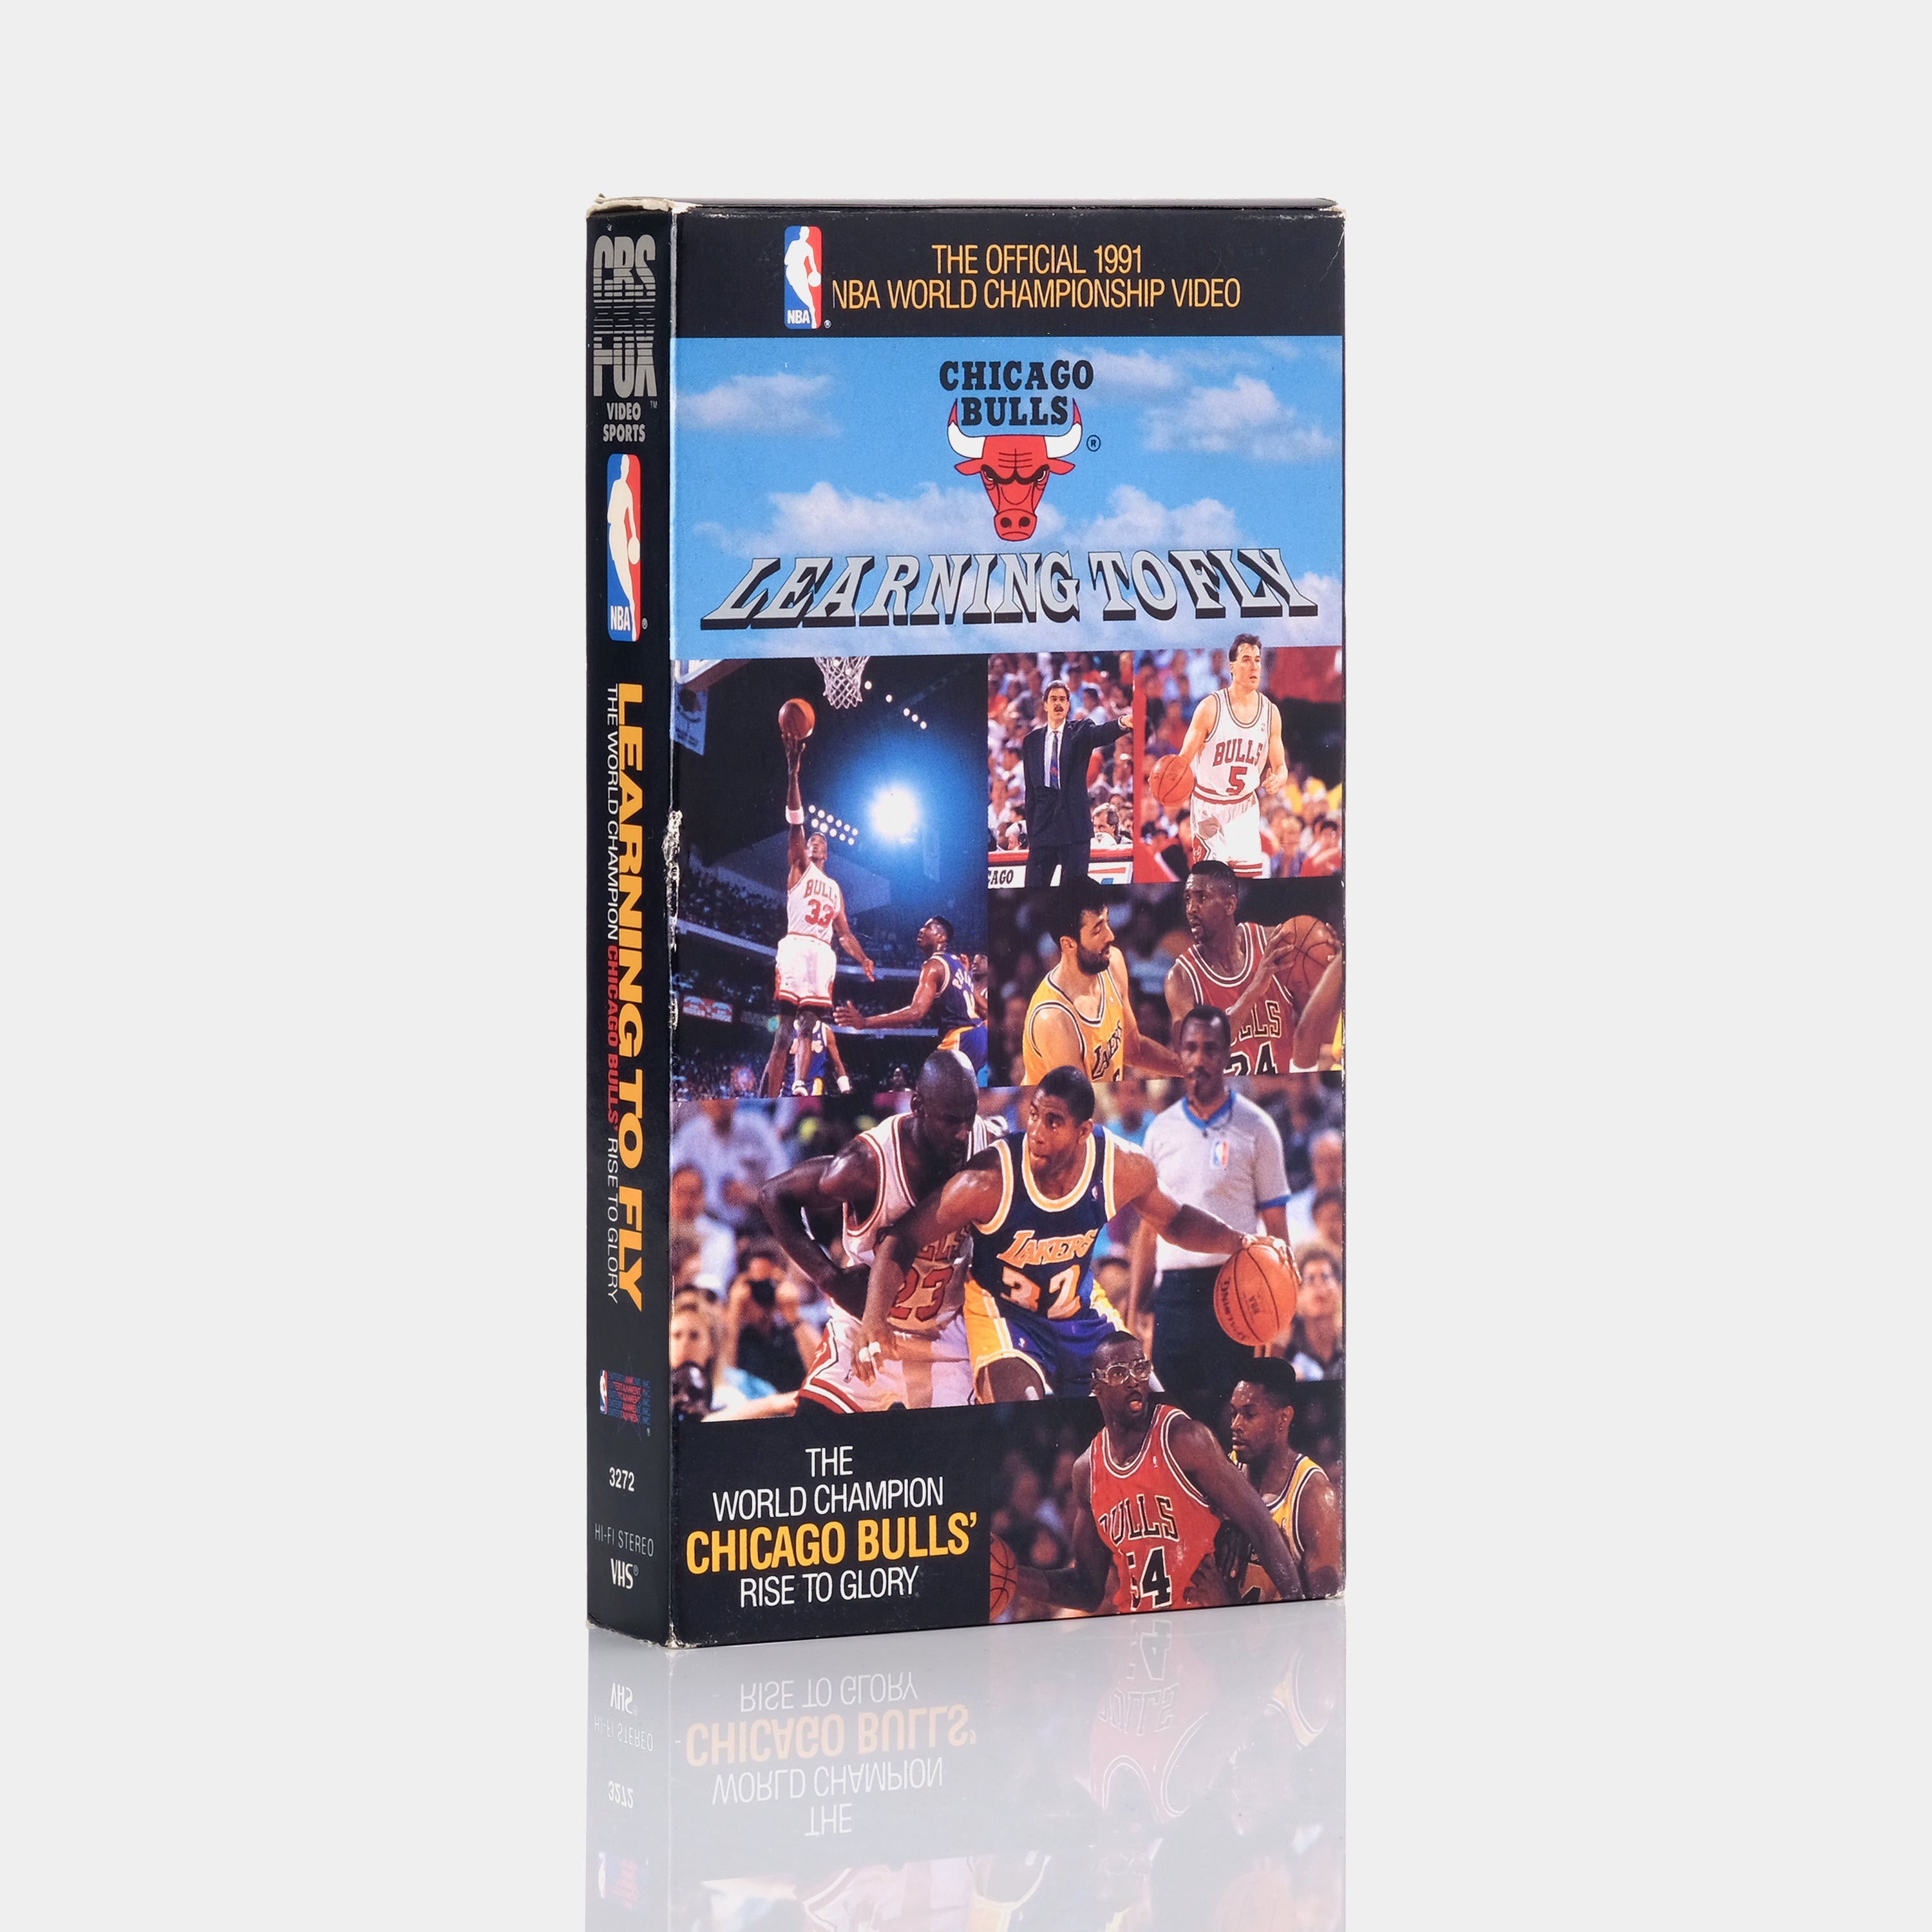 Learning To Fly: The World Champion Chicago Bulls' Rise To Glory VHS Tape